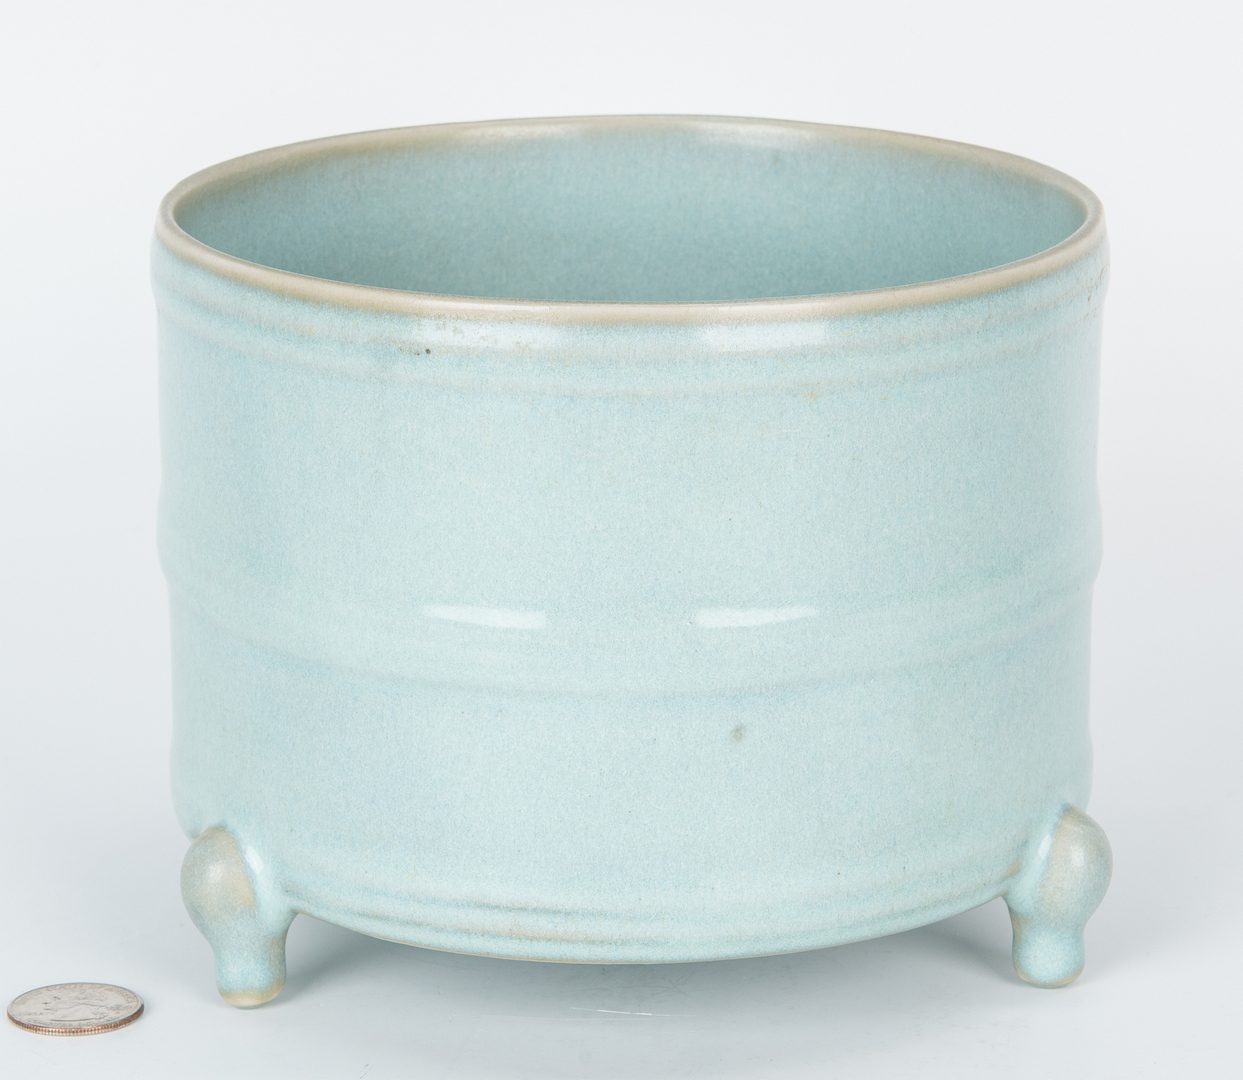 Lot 216: Chinese Ding Style Vase & Longquan Celadon Censer, 2 items